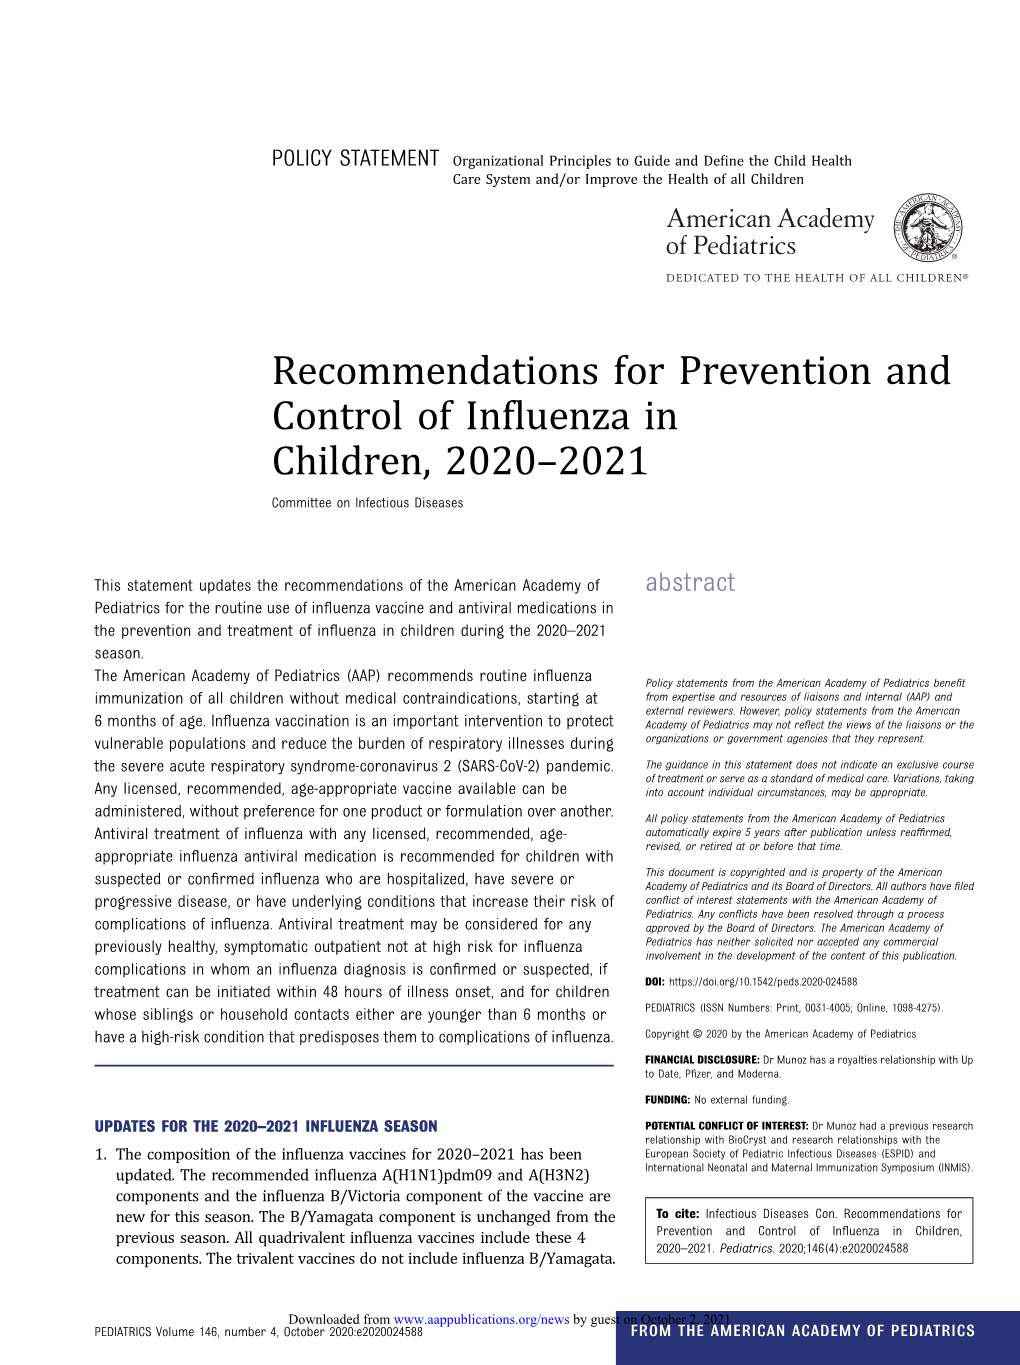 Recommendations for Prevention and Control of Influenza in Children, 2020–2021